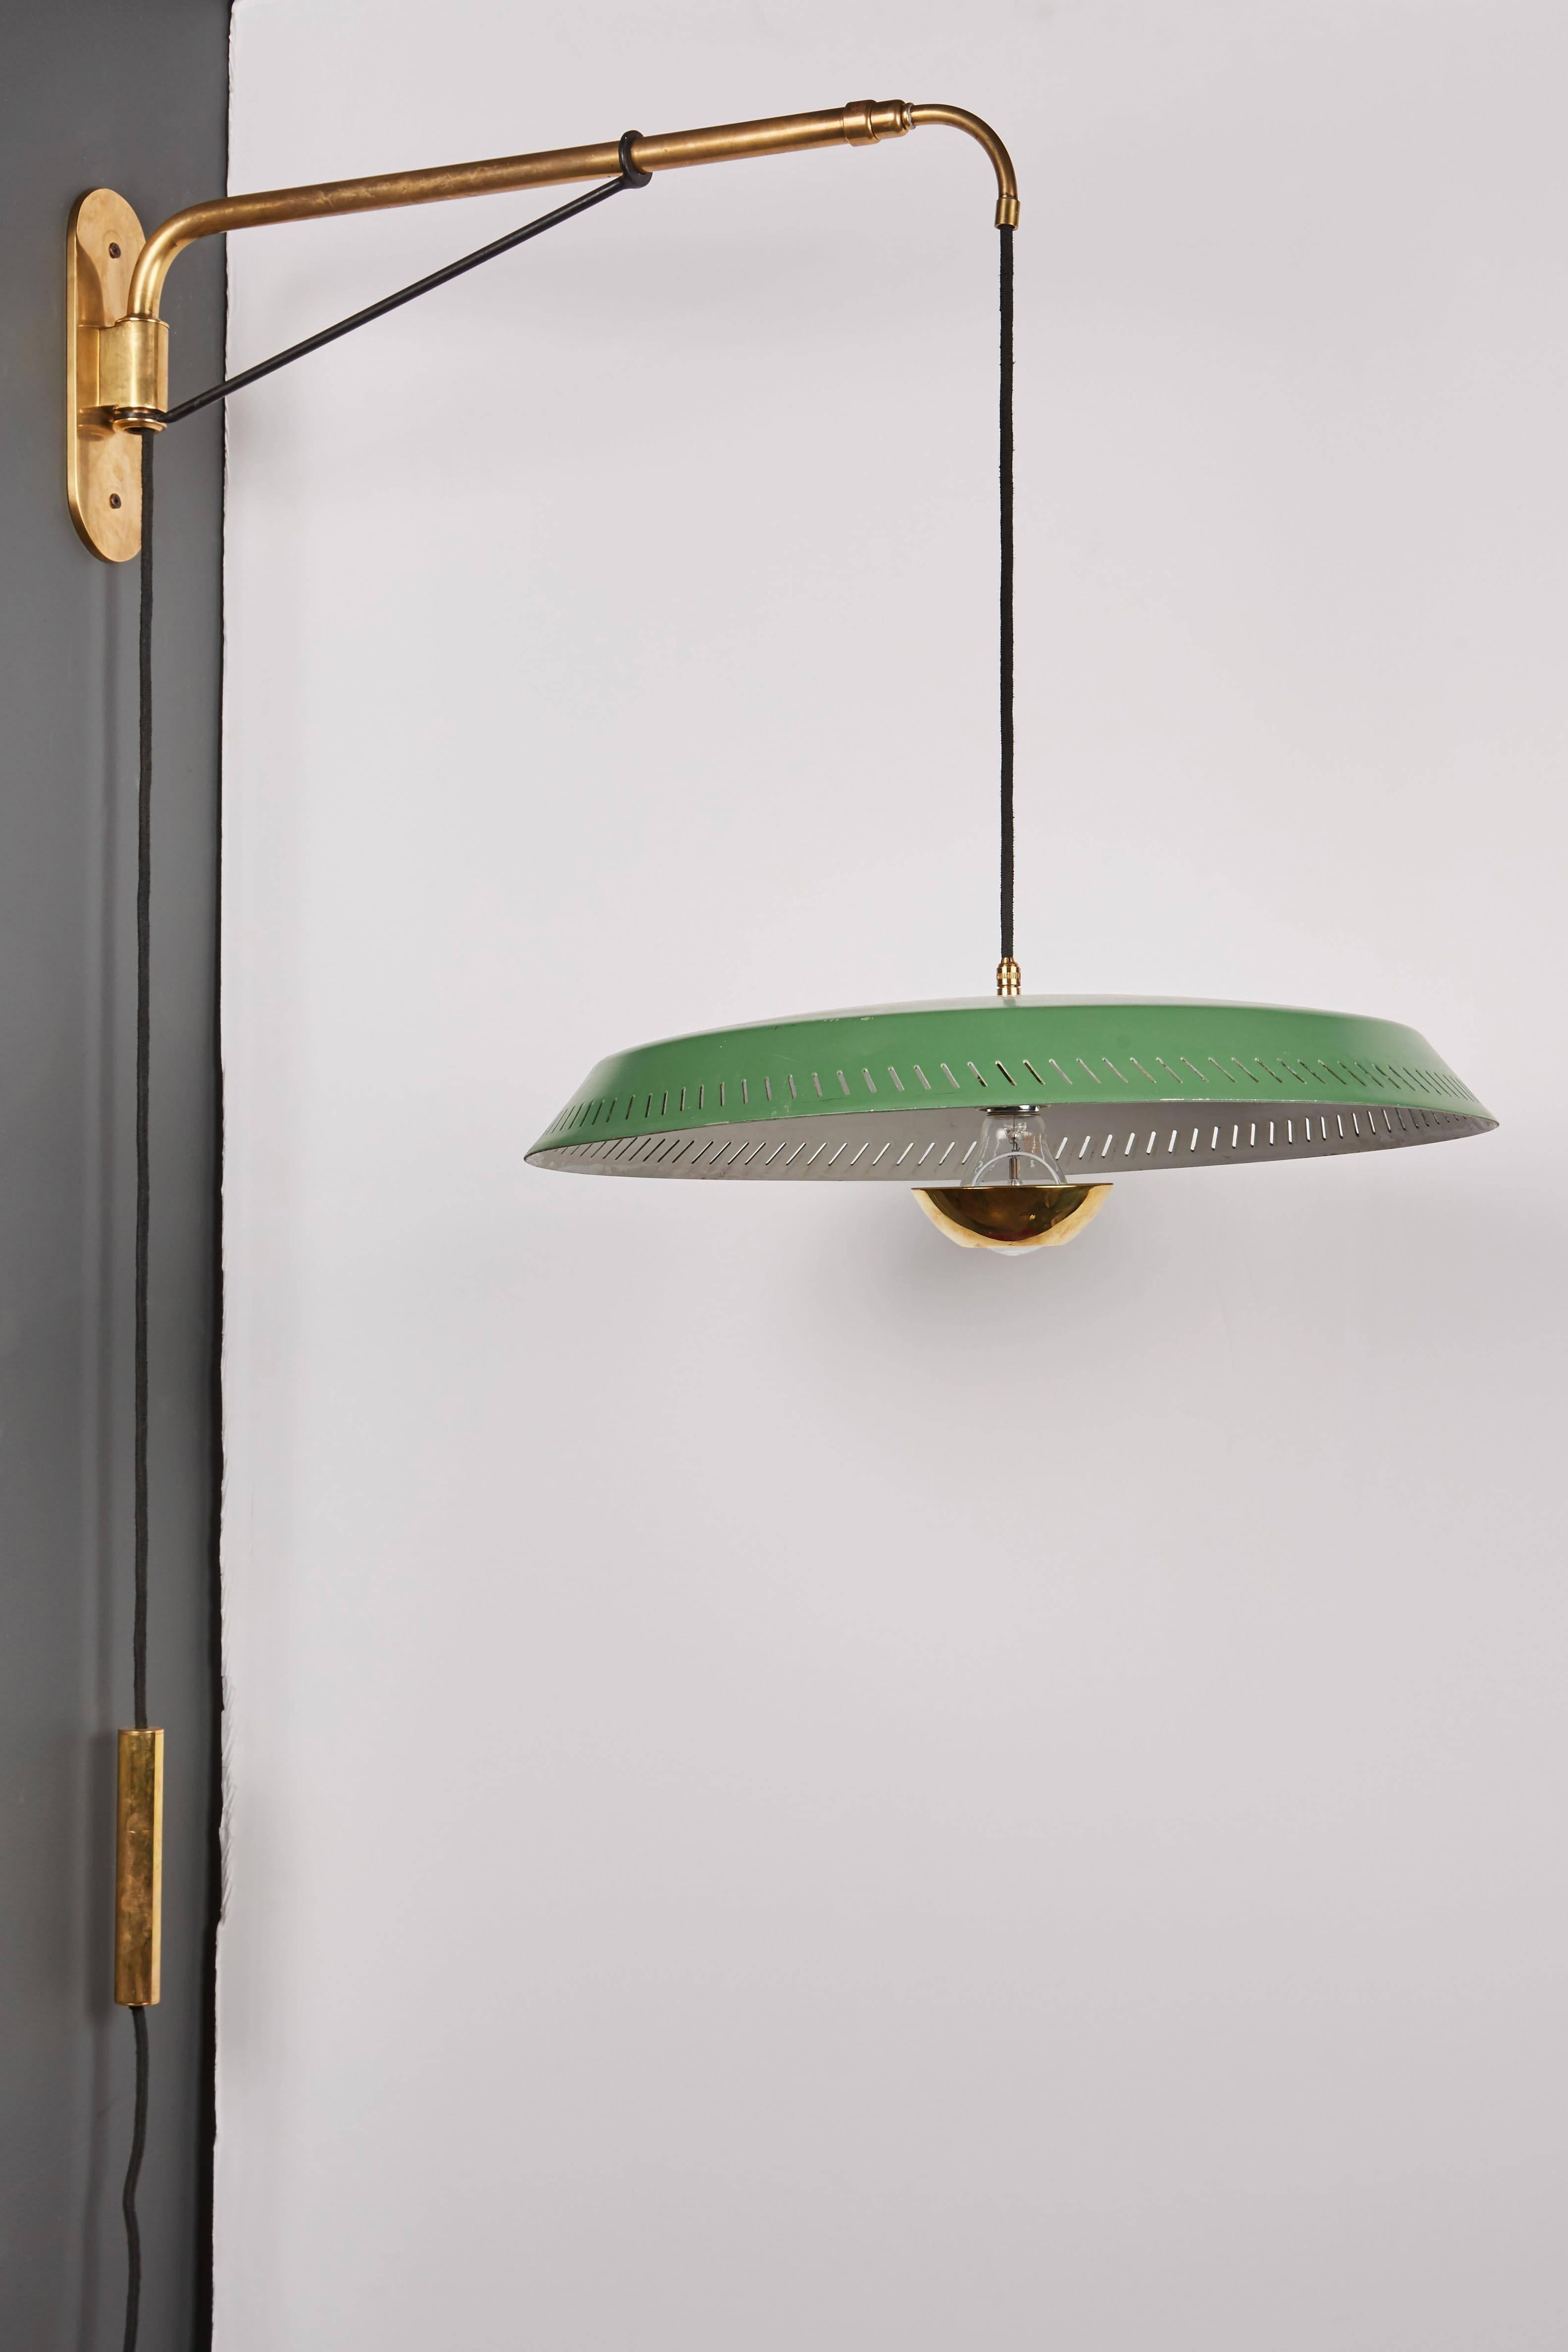 Mid-Century Modern Telescoping Stilnovo Adjustable Wall Lamp with Green Perforated Metal Shade